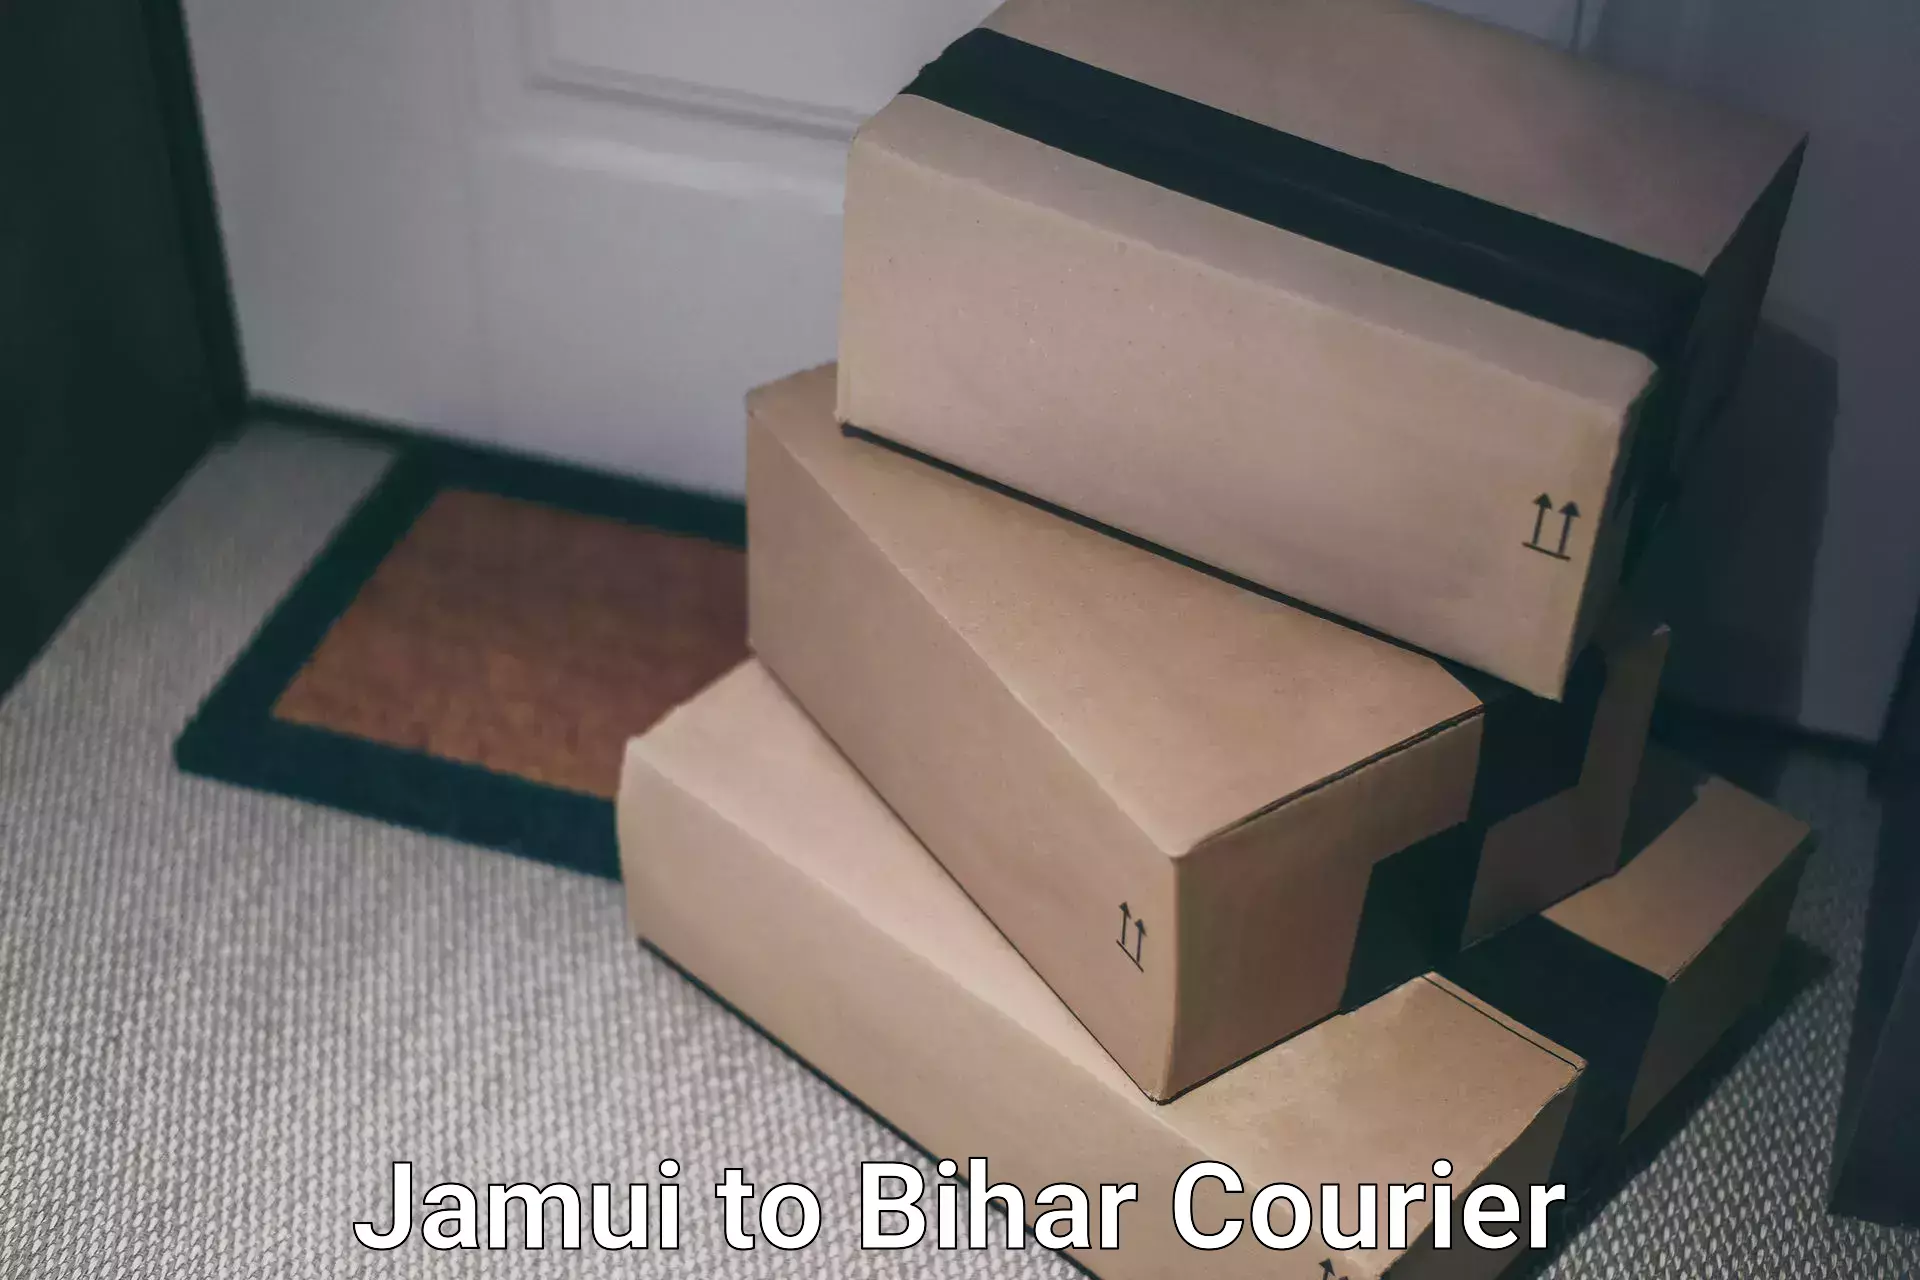 Delivery service partnership Jamui to Fatwah